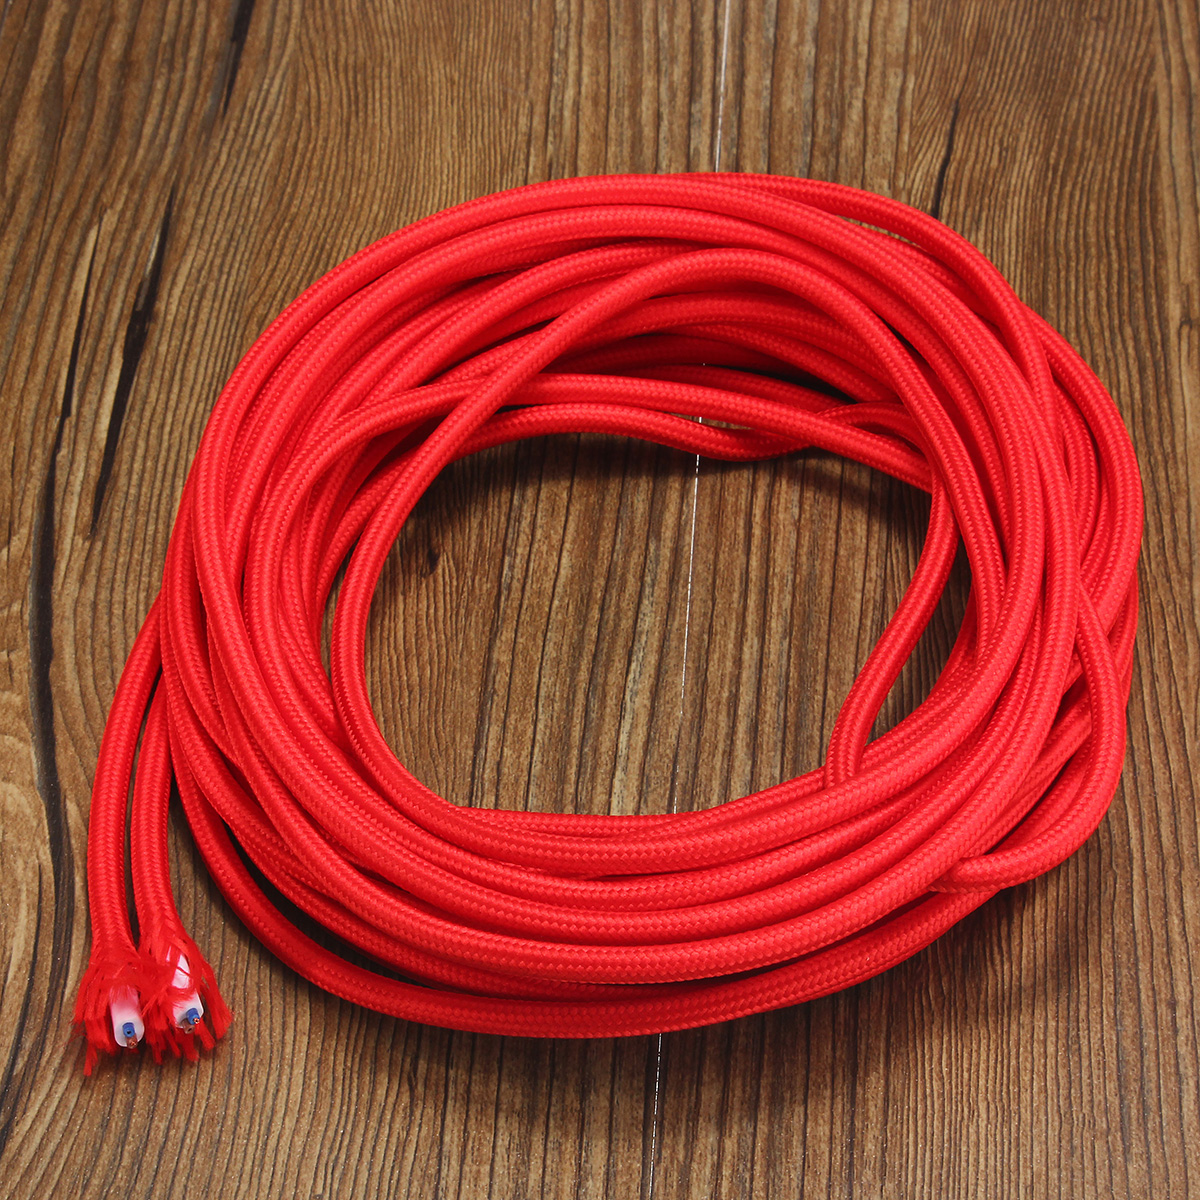 10M-2-Cord-Color-Vintage-Twist-Braided-Fabric-Light-Cable-Electric-Wire-1069140-4